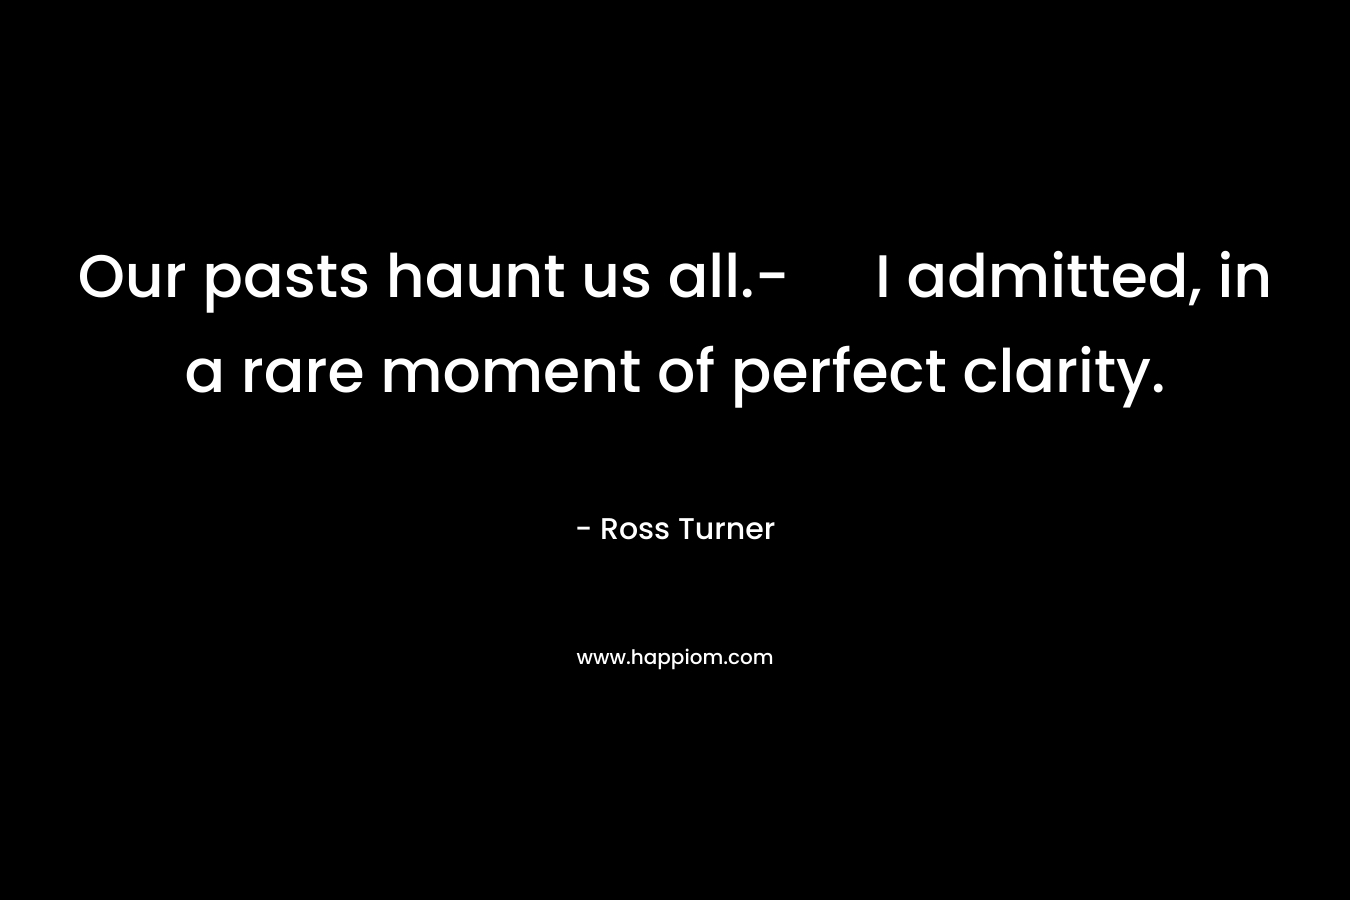 Our pasts haunt us all.- I admitted, in a rare moment of perfect clarity.